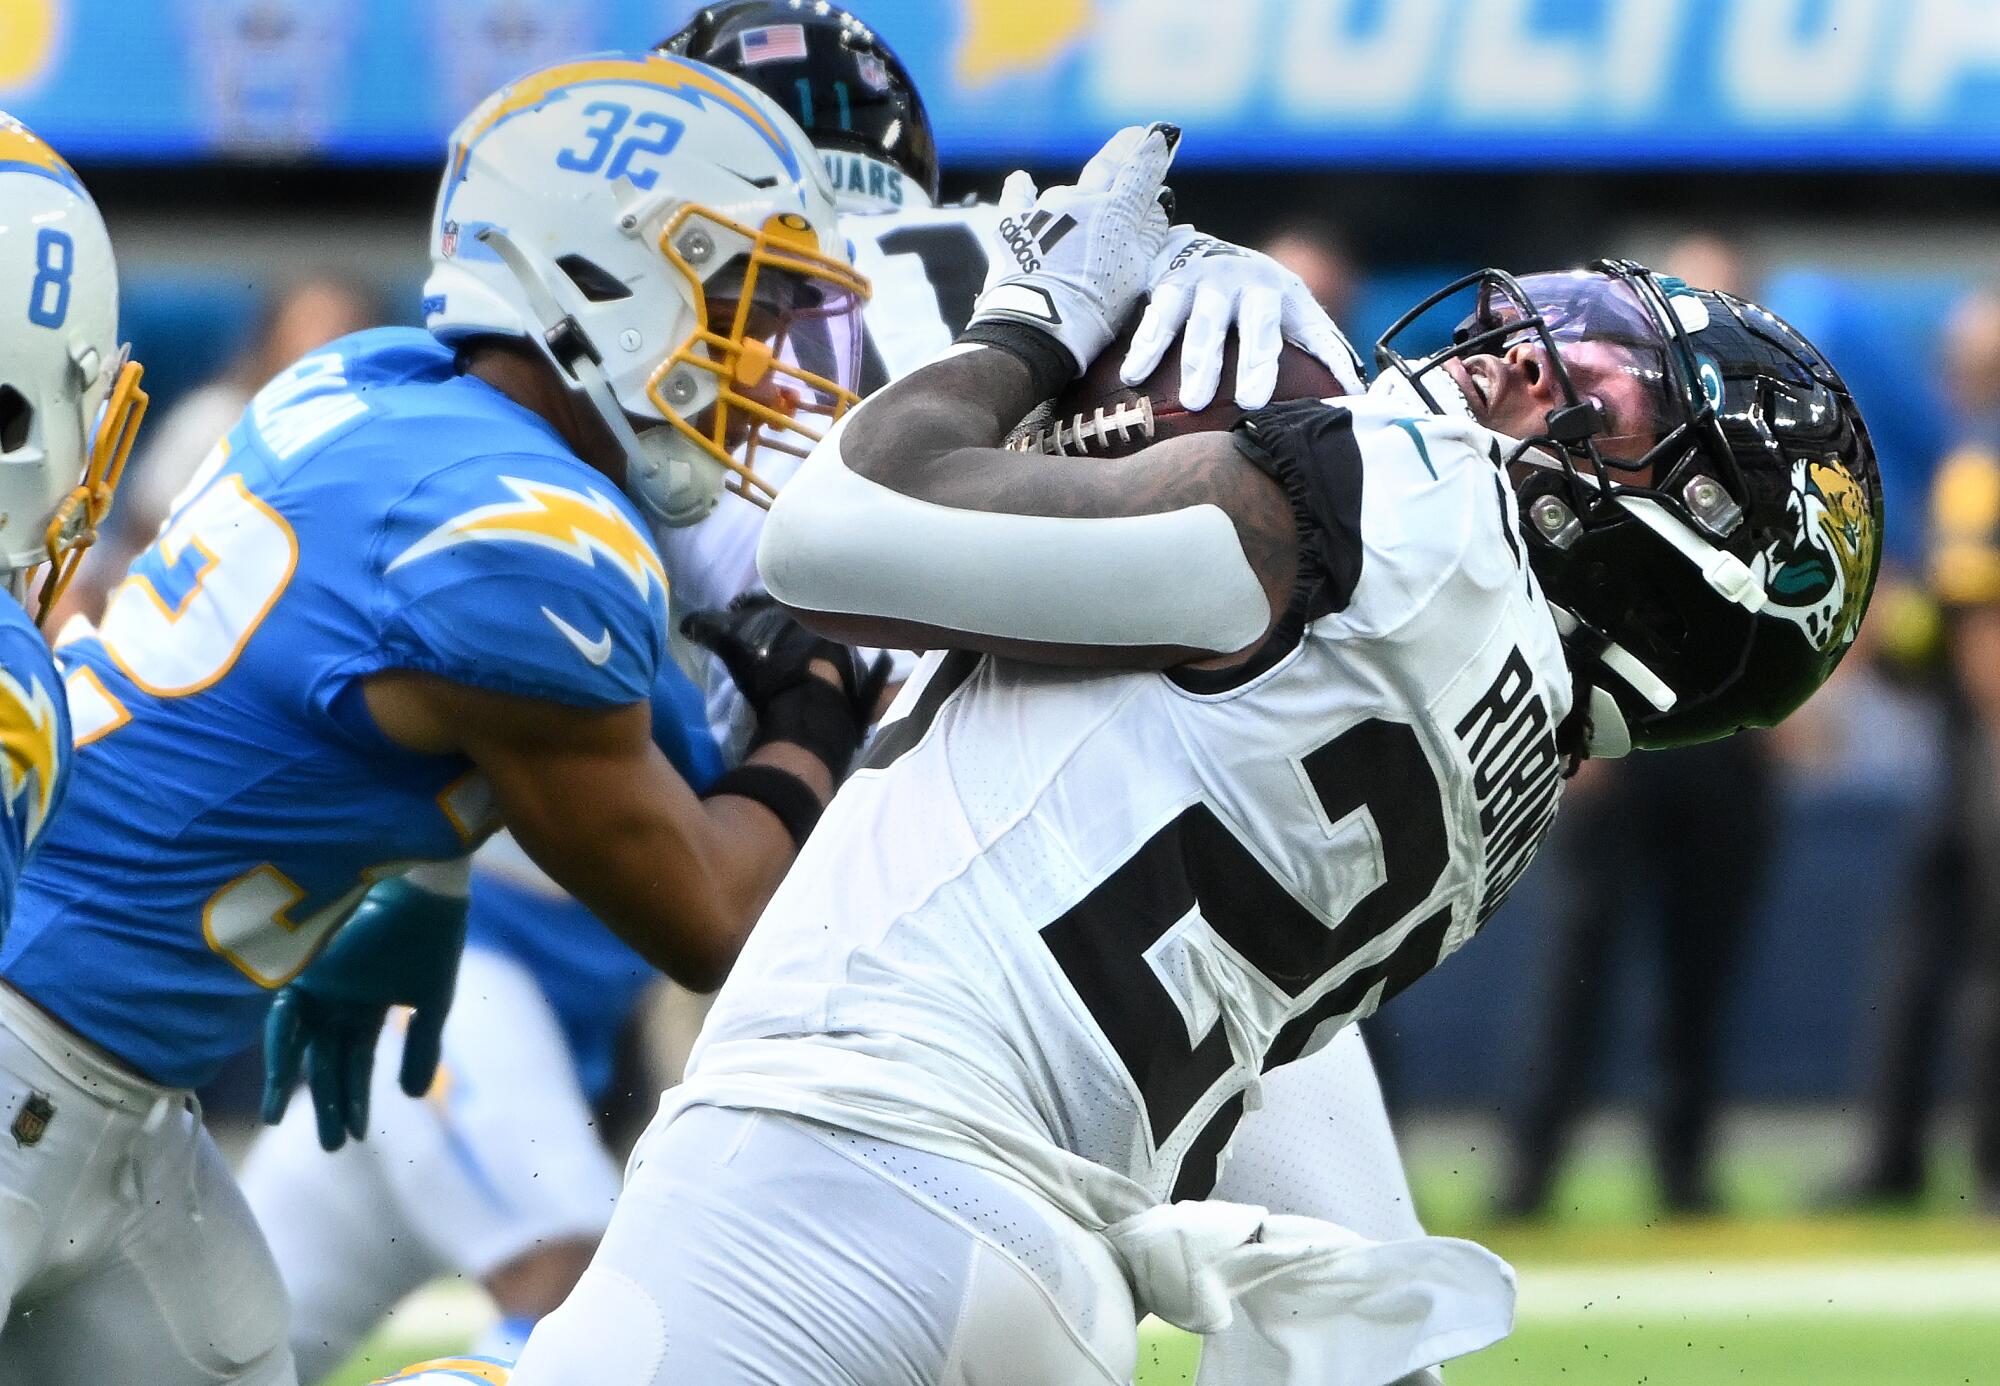 Jaguars running back James Robinson picks up yards against the Chargers in the second quarter.